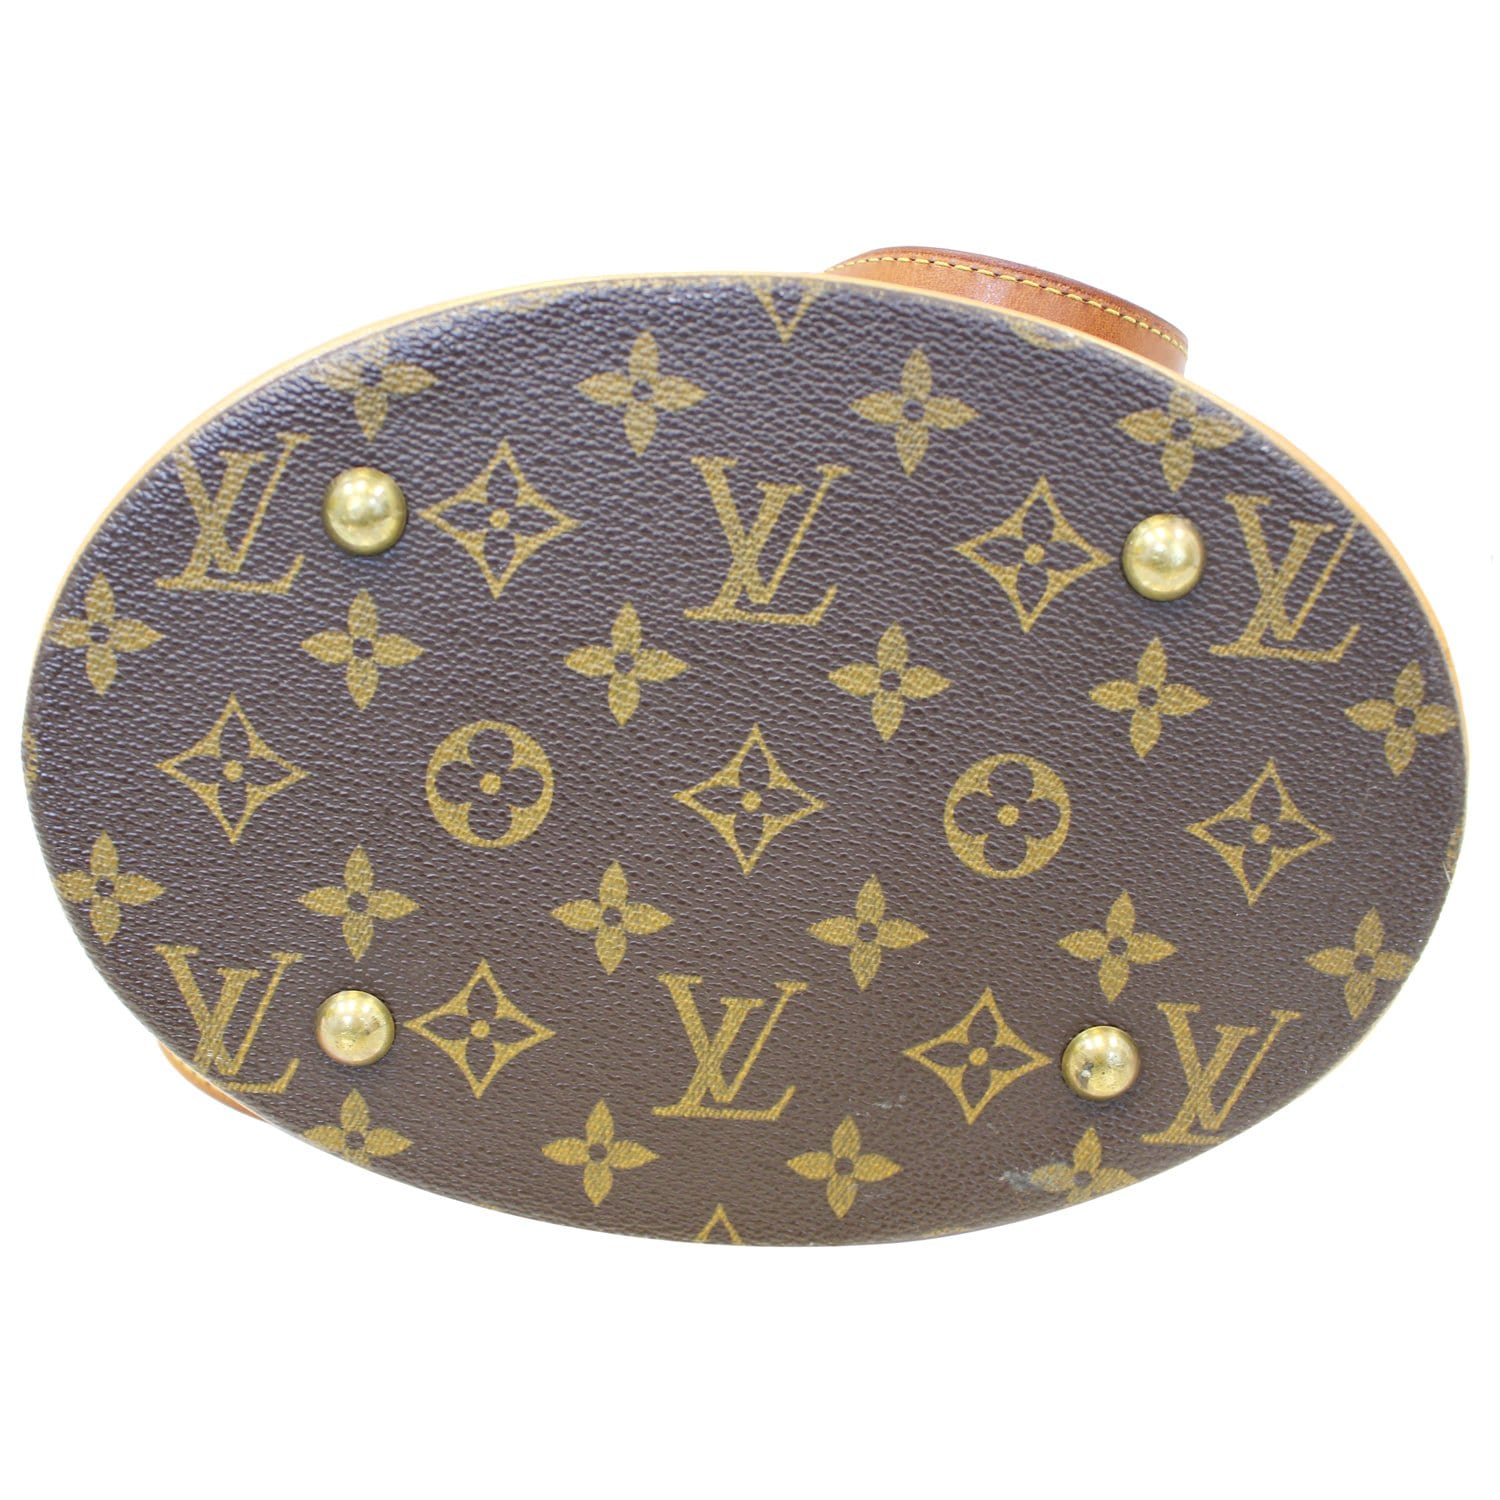 Simple yet effective 🤎 DM to purchase the Louis Vuitton Monogram